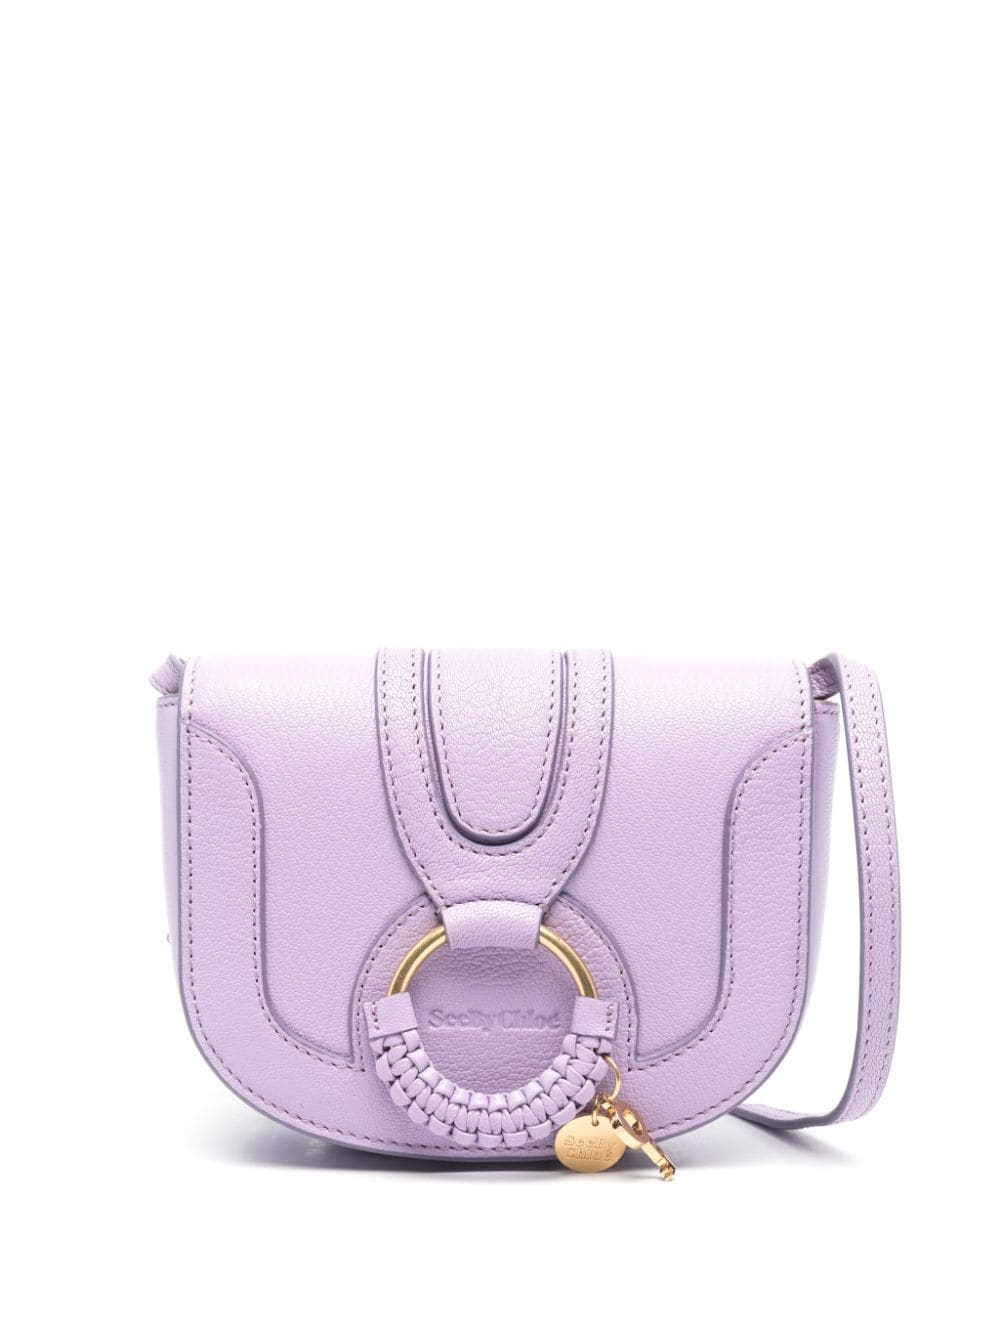 See by Chloé logo-debossed leather mini bag - Violett von See by Chloé